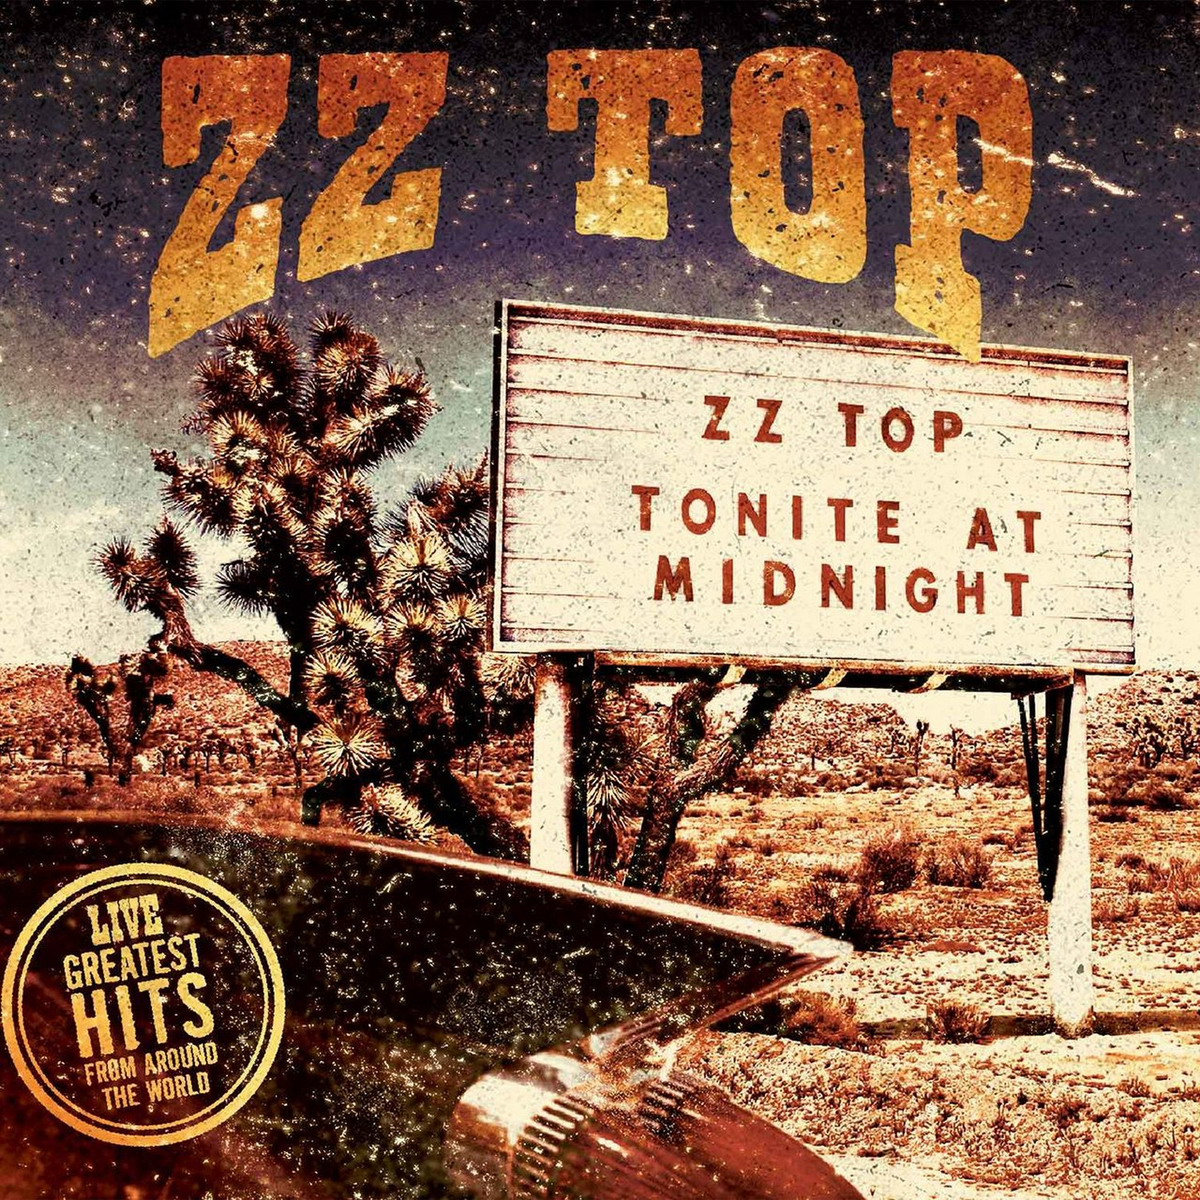 ZZ Top – Live: Greatest Hits From Around The World (2016) [HDTracks FLAC 24bit/48kHz]